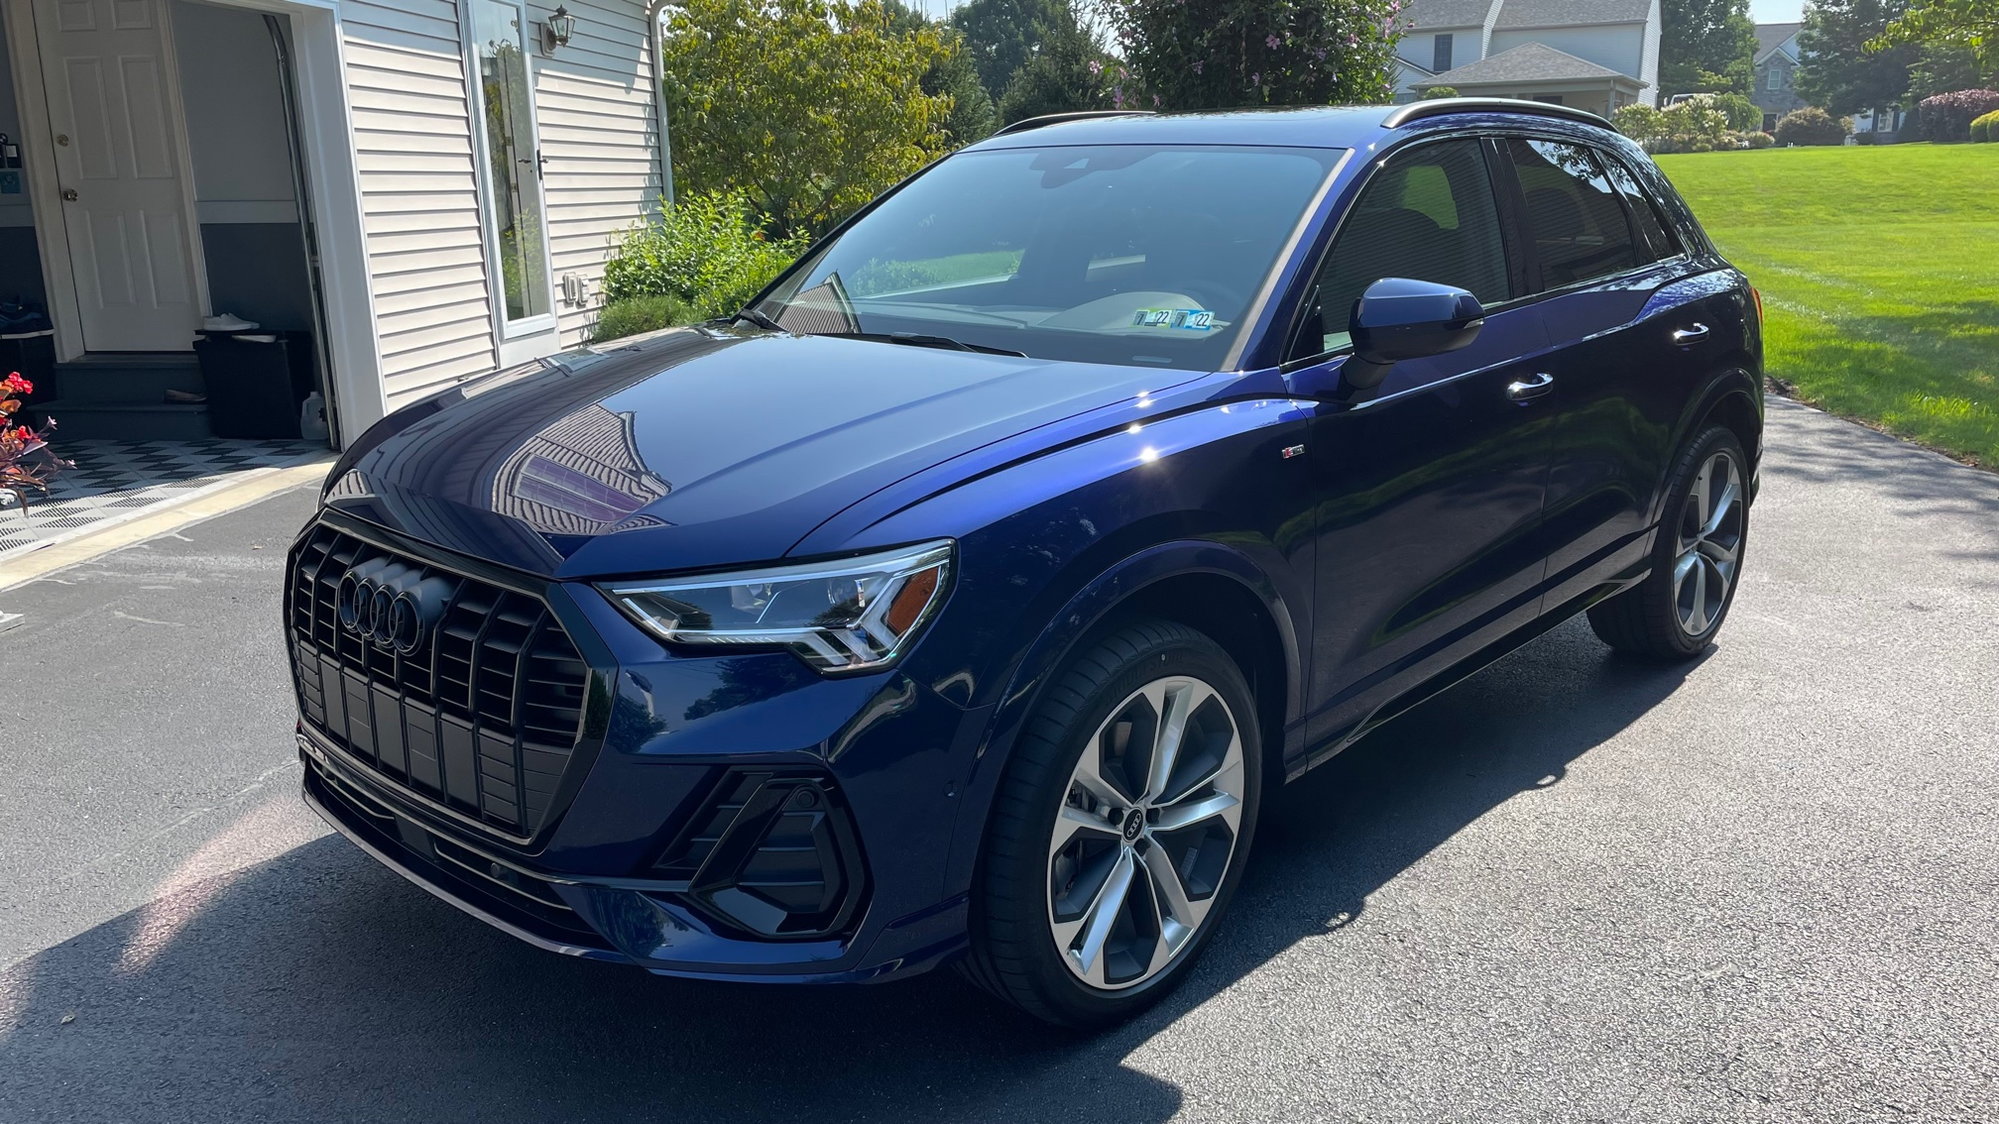 Just Took Delivery 2021 Q3 PP Navarra Blue/Rotor Gray AudiWorld Forums